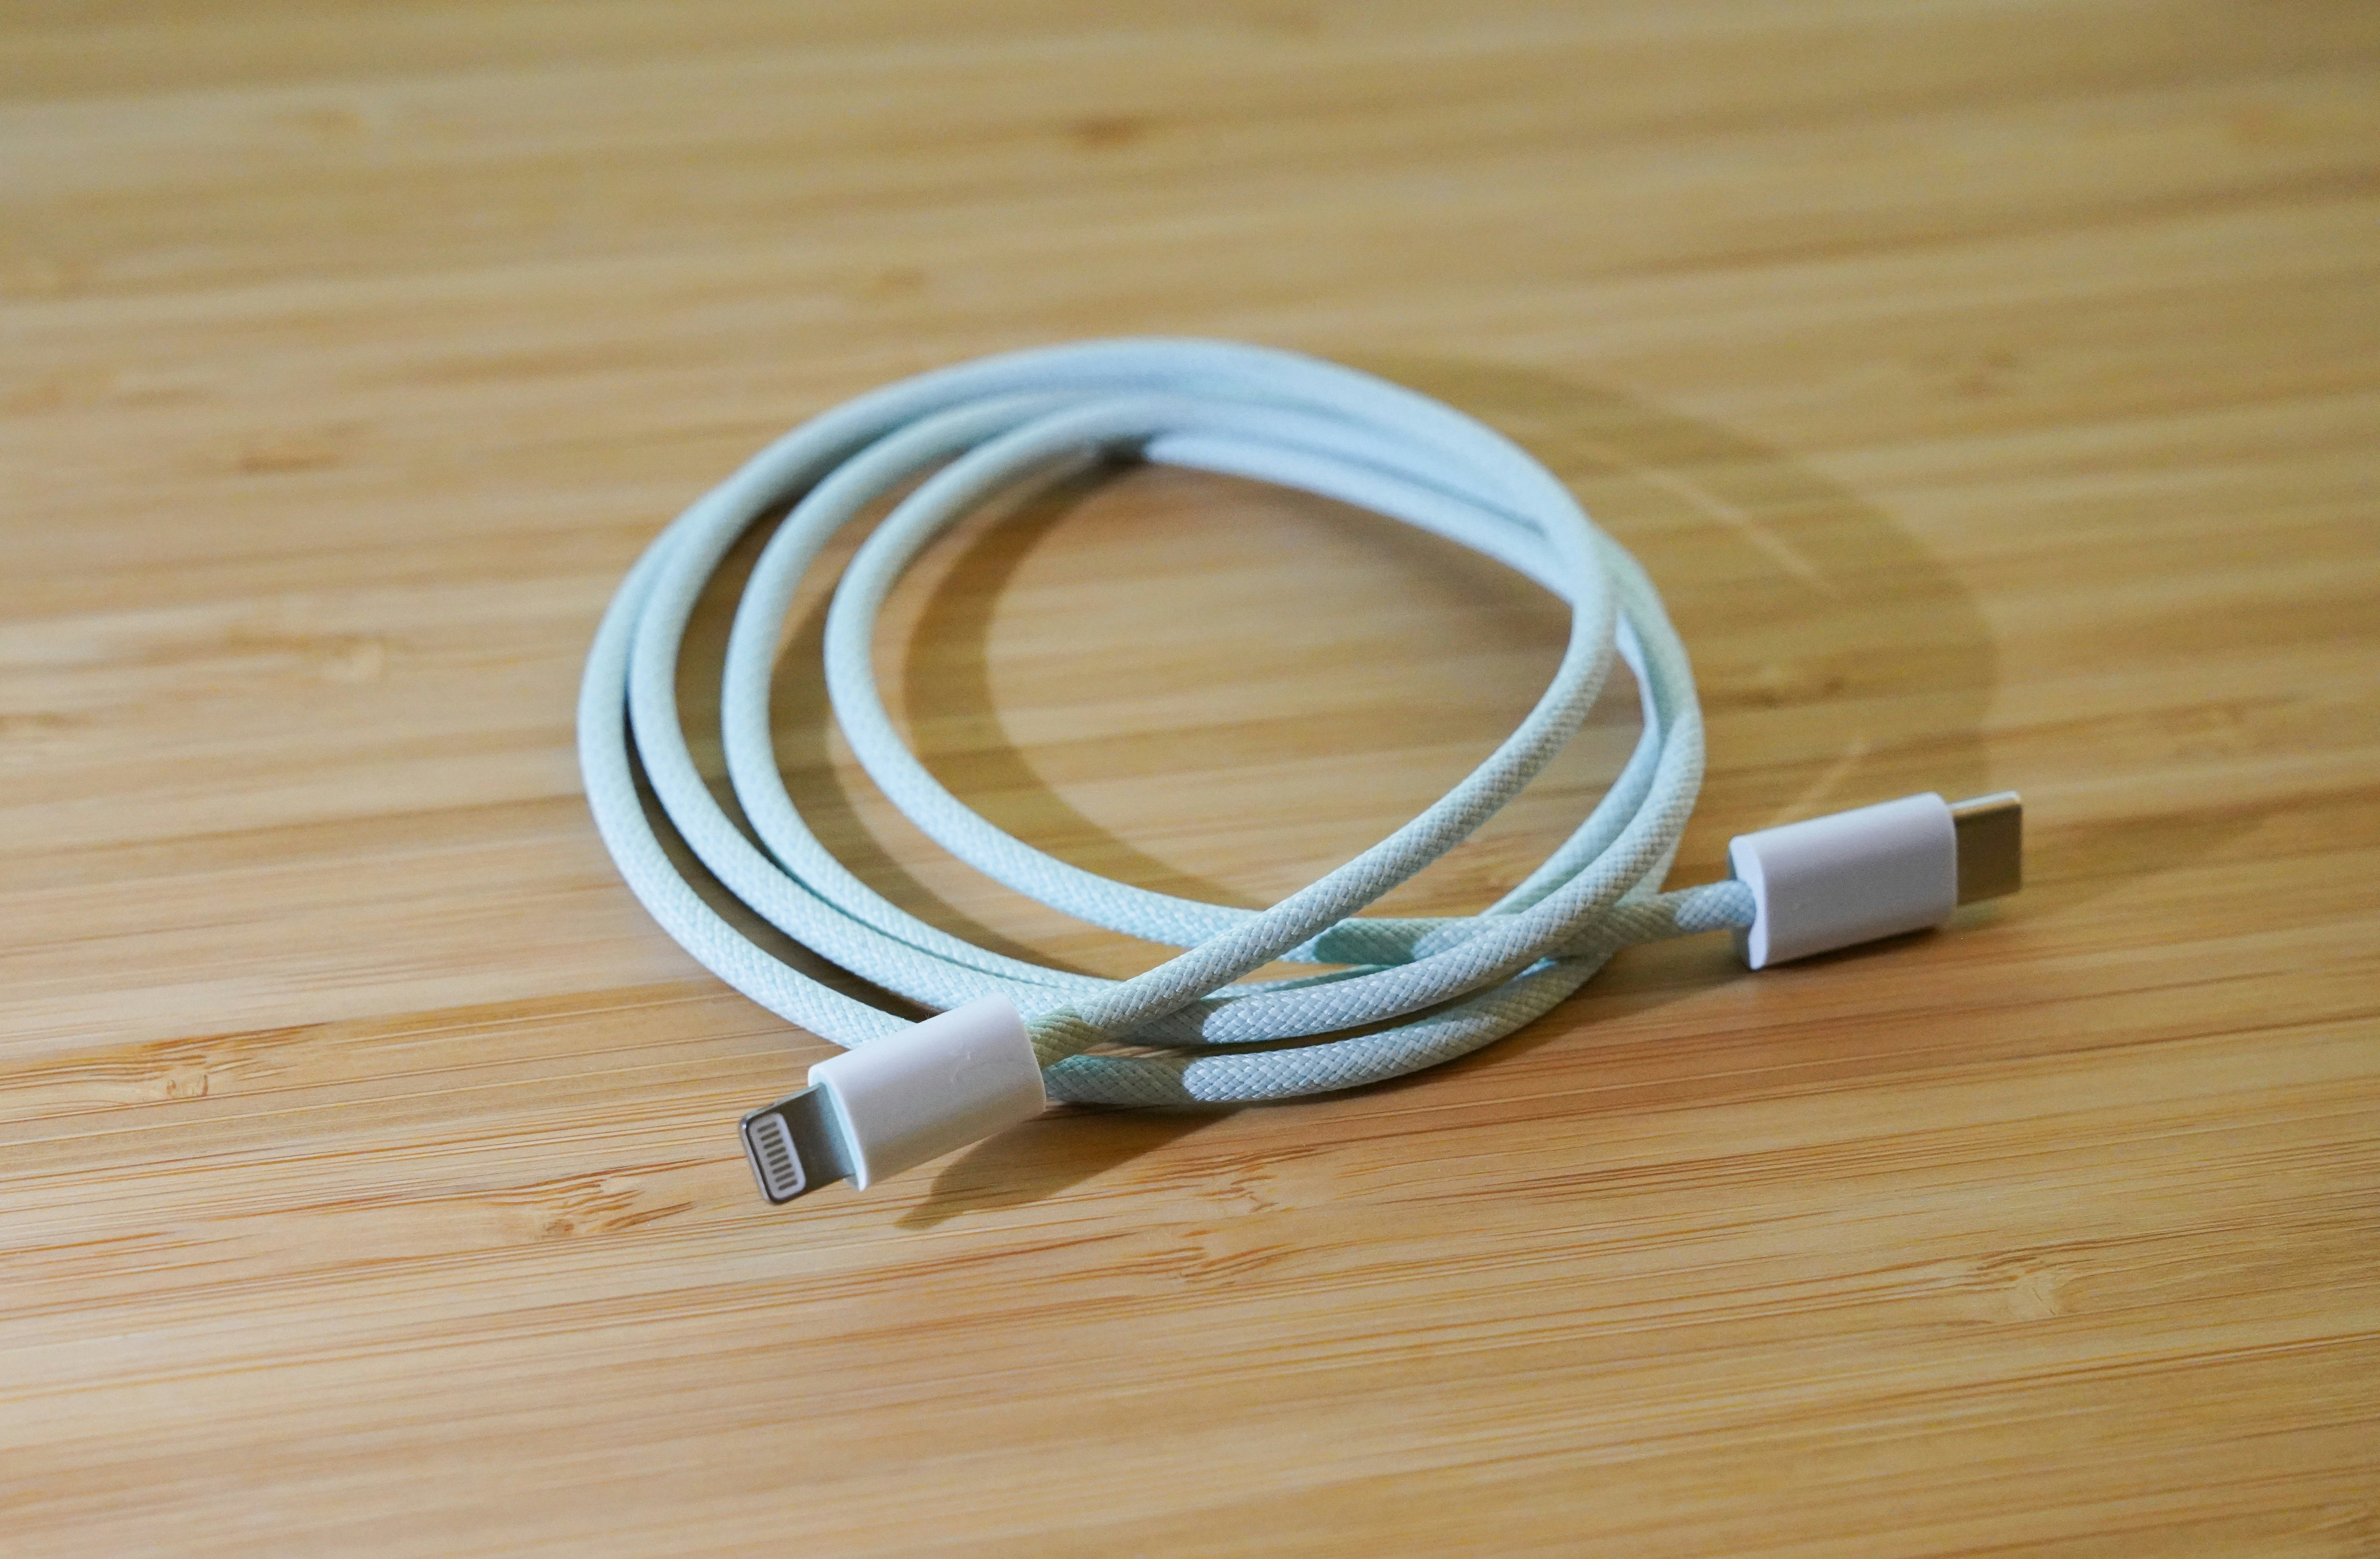 New Images Leak of iPhone 12 Braided USB-C to Lightning Cable - MacRumors